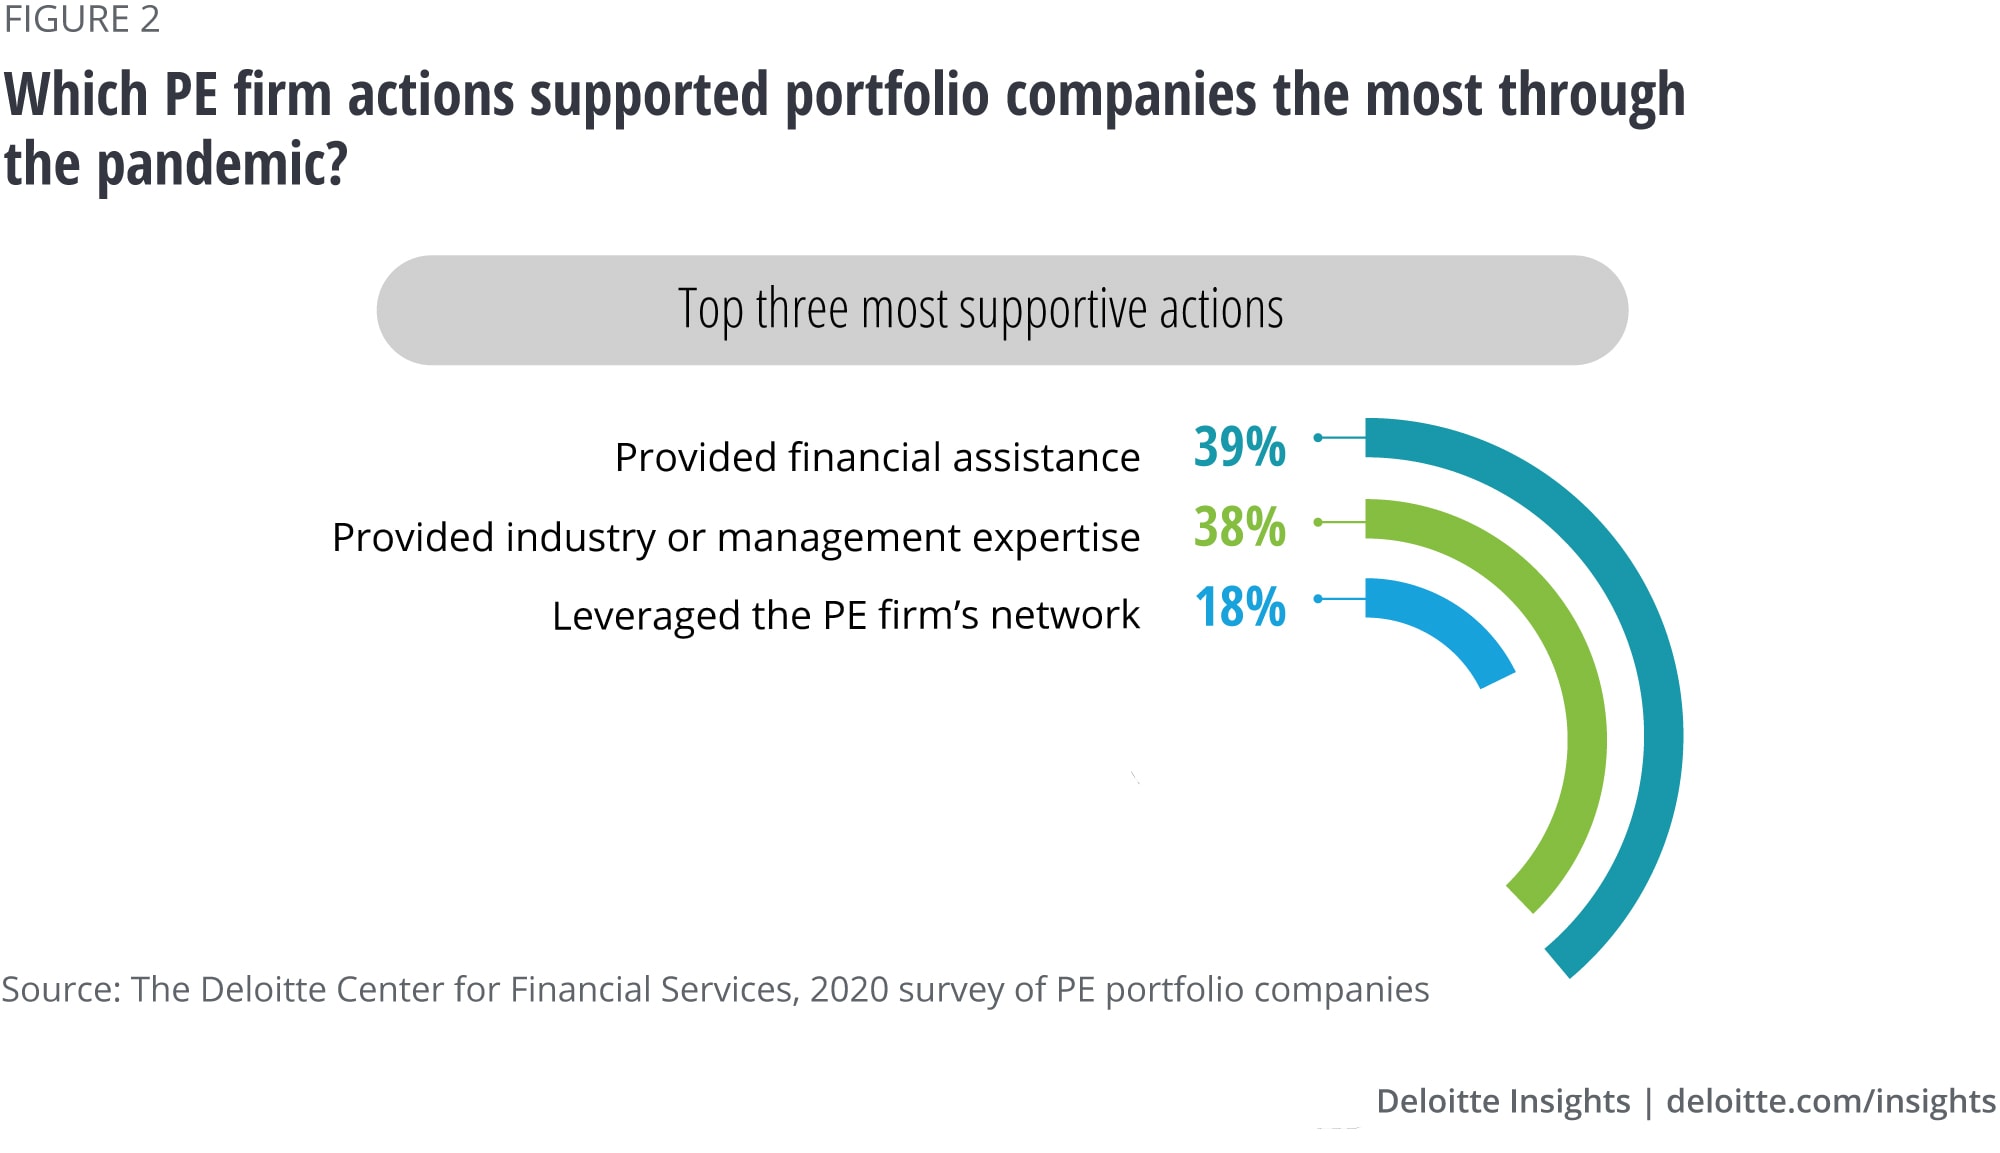 Some of the supportive actions PE firms took to help portfolio companies recover from COVID-19